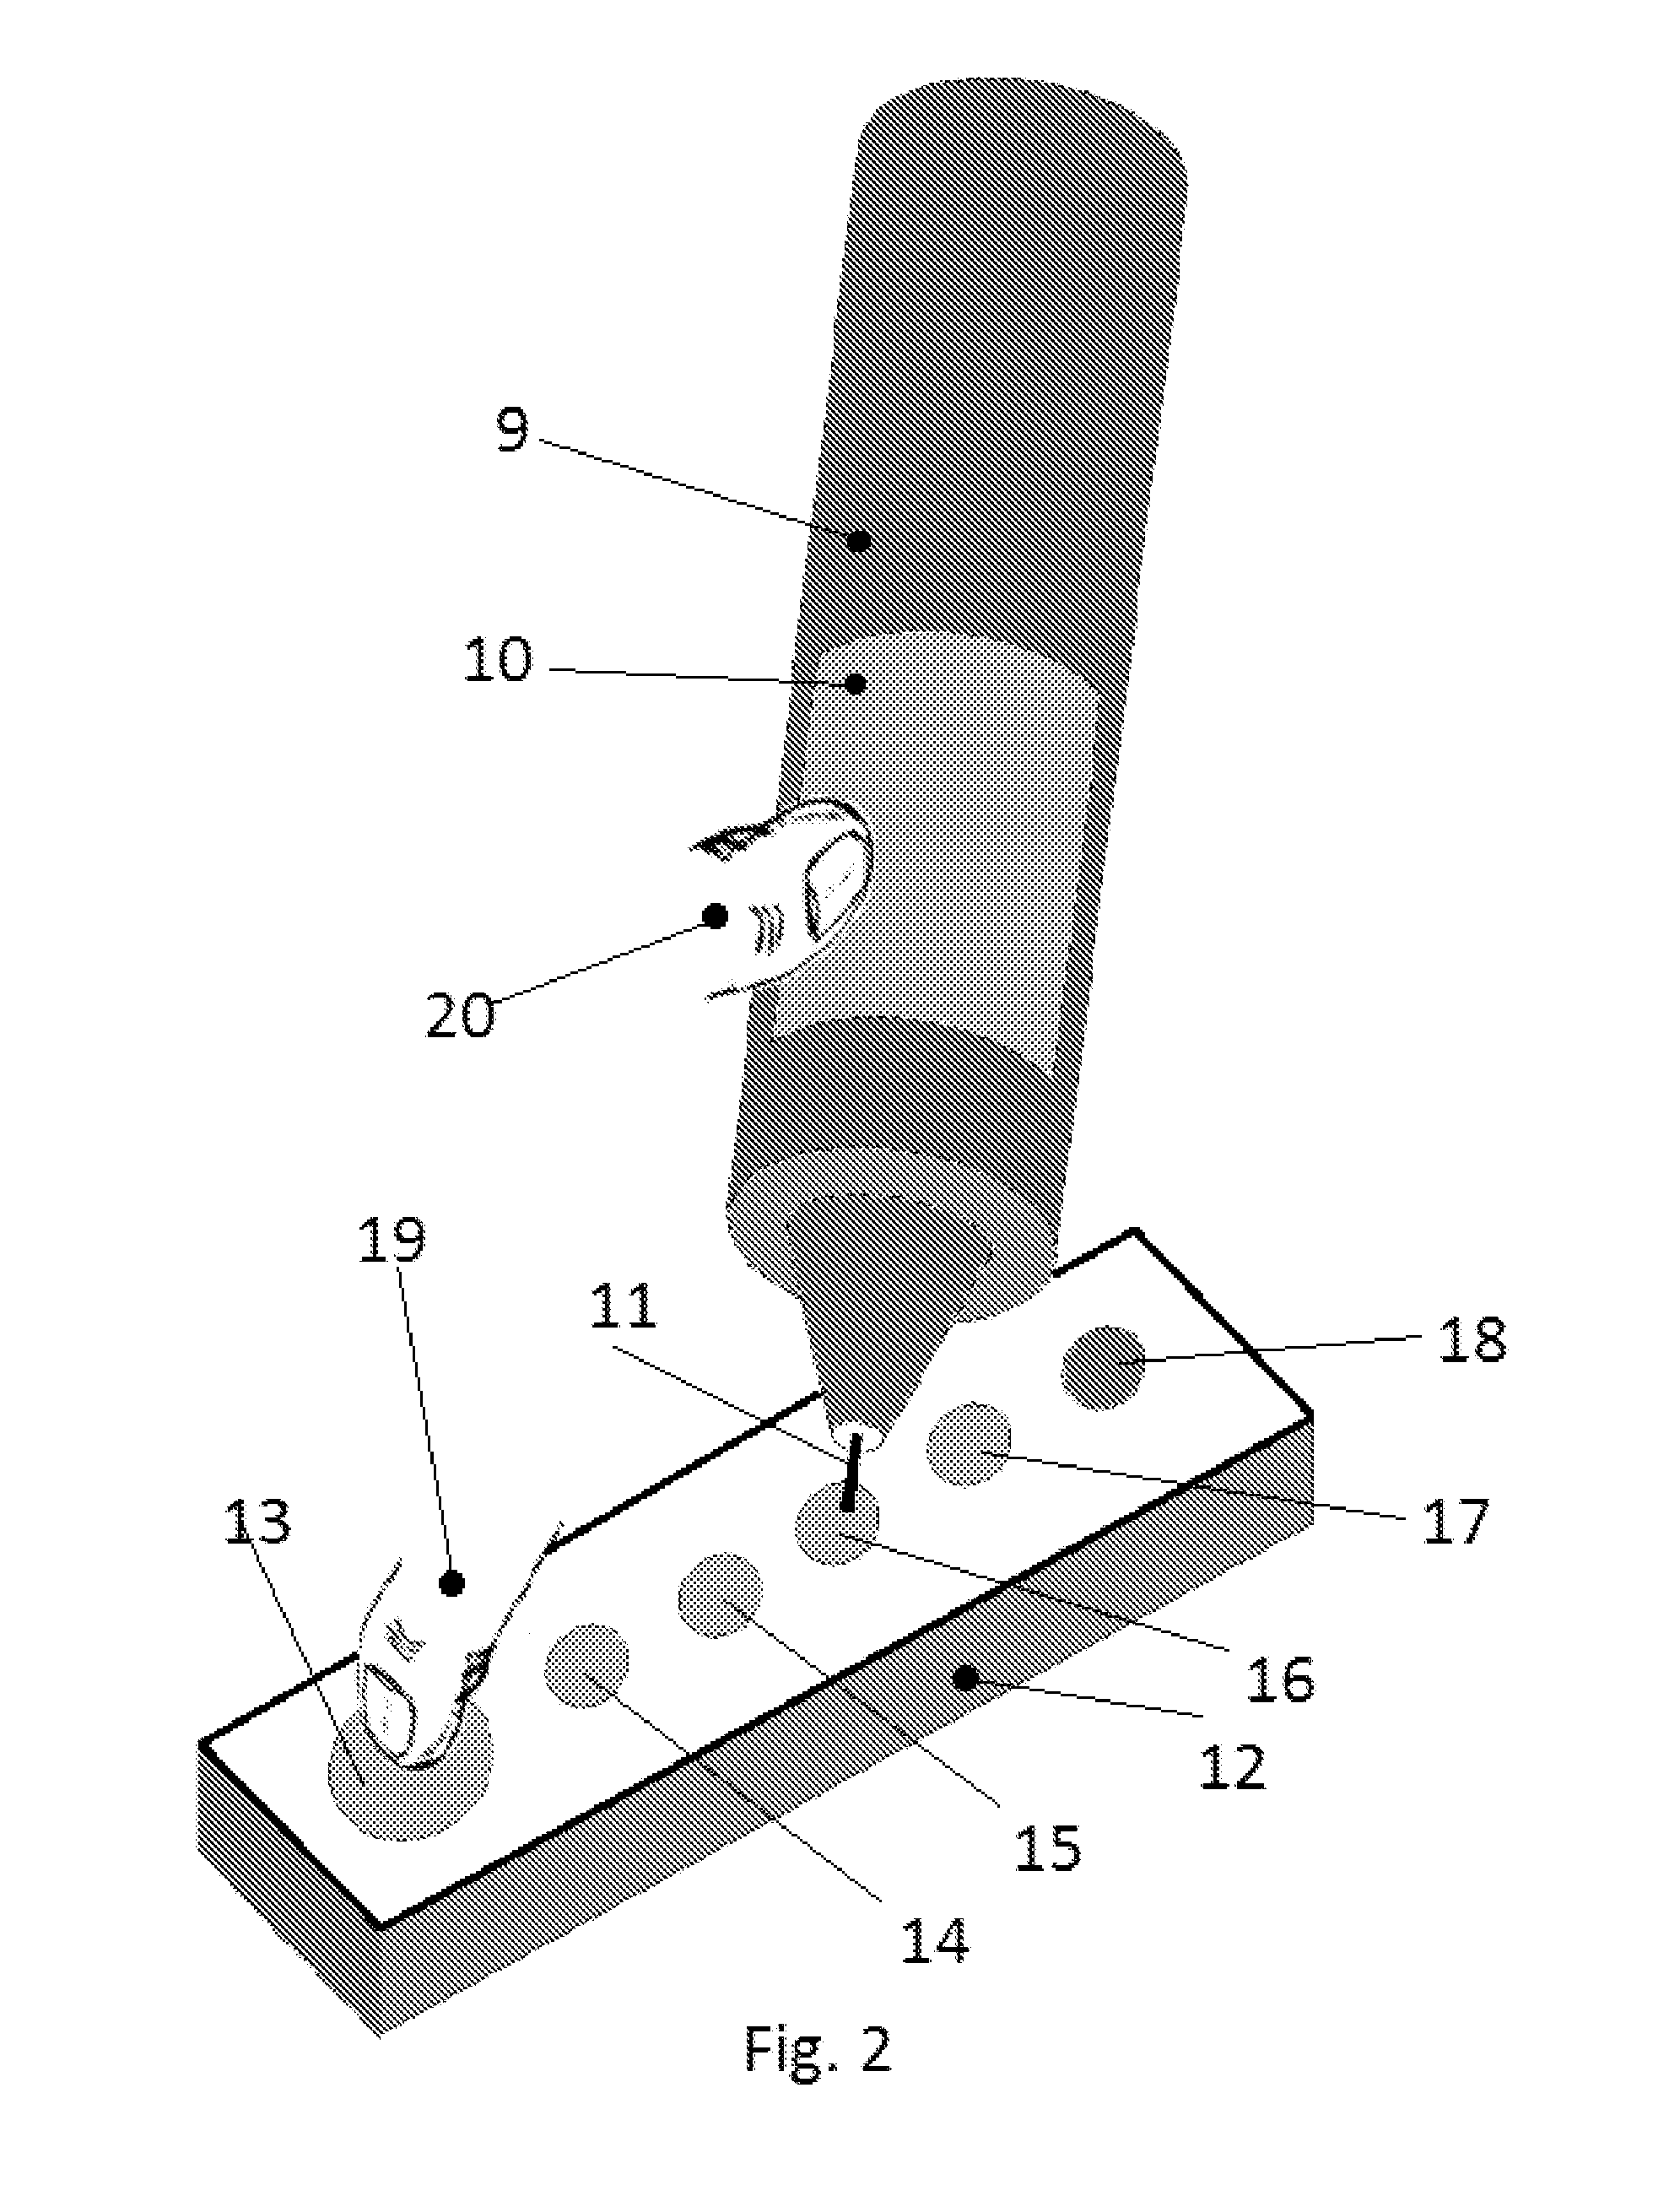 Apparatus for imitating thermal conductivity and electrical resistance of diamonds and their substitutes